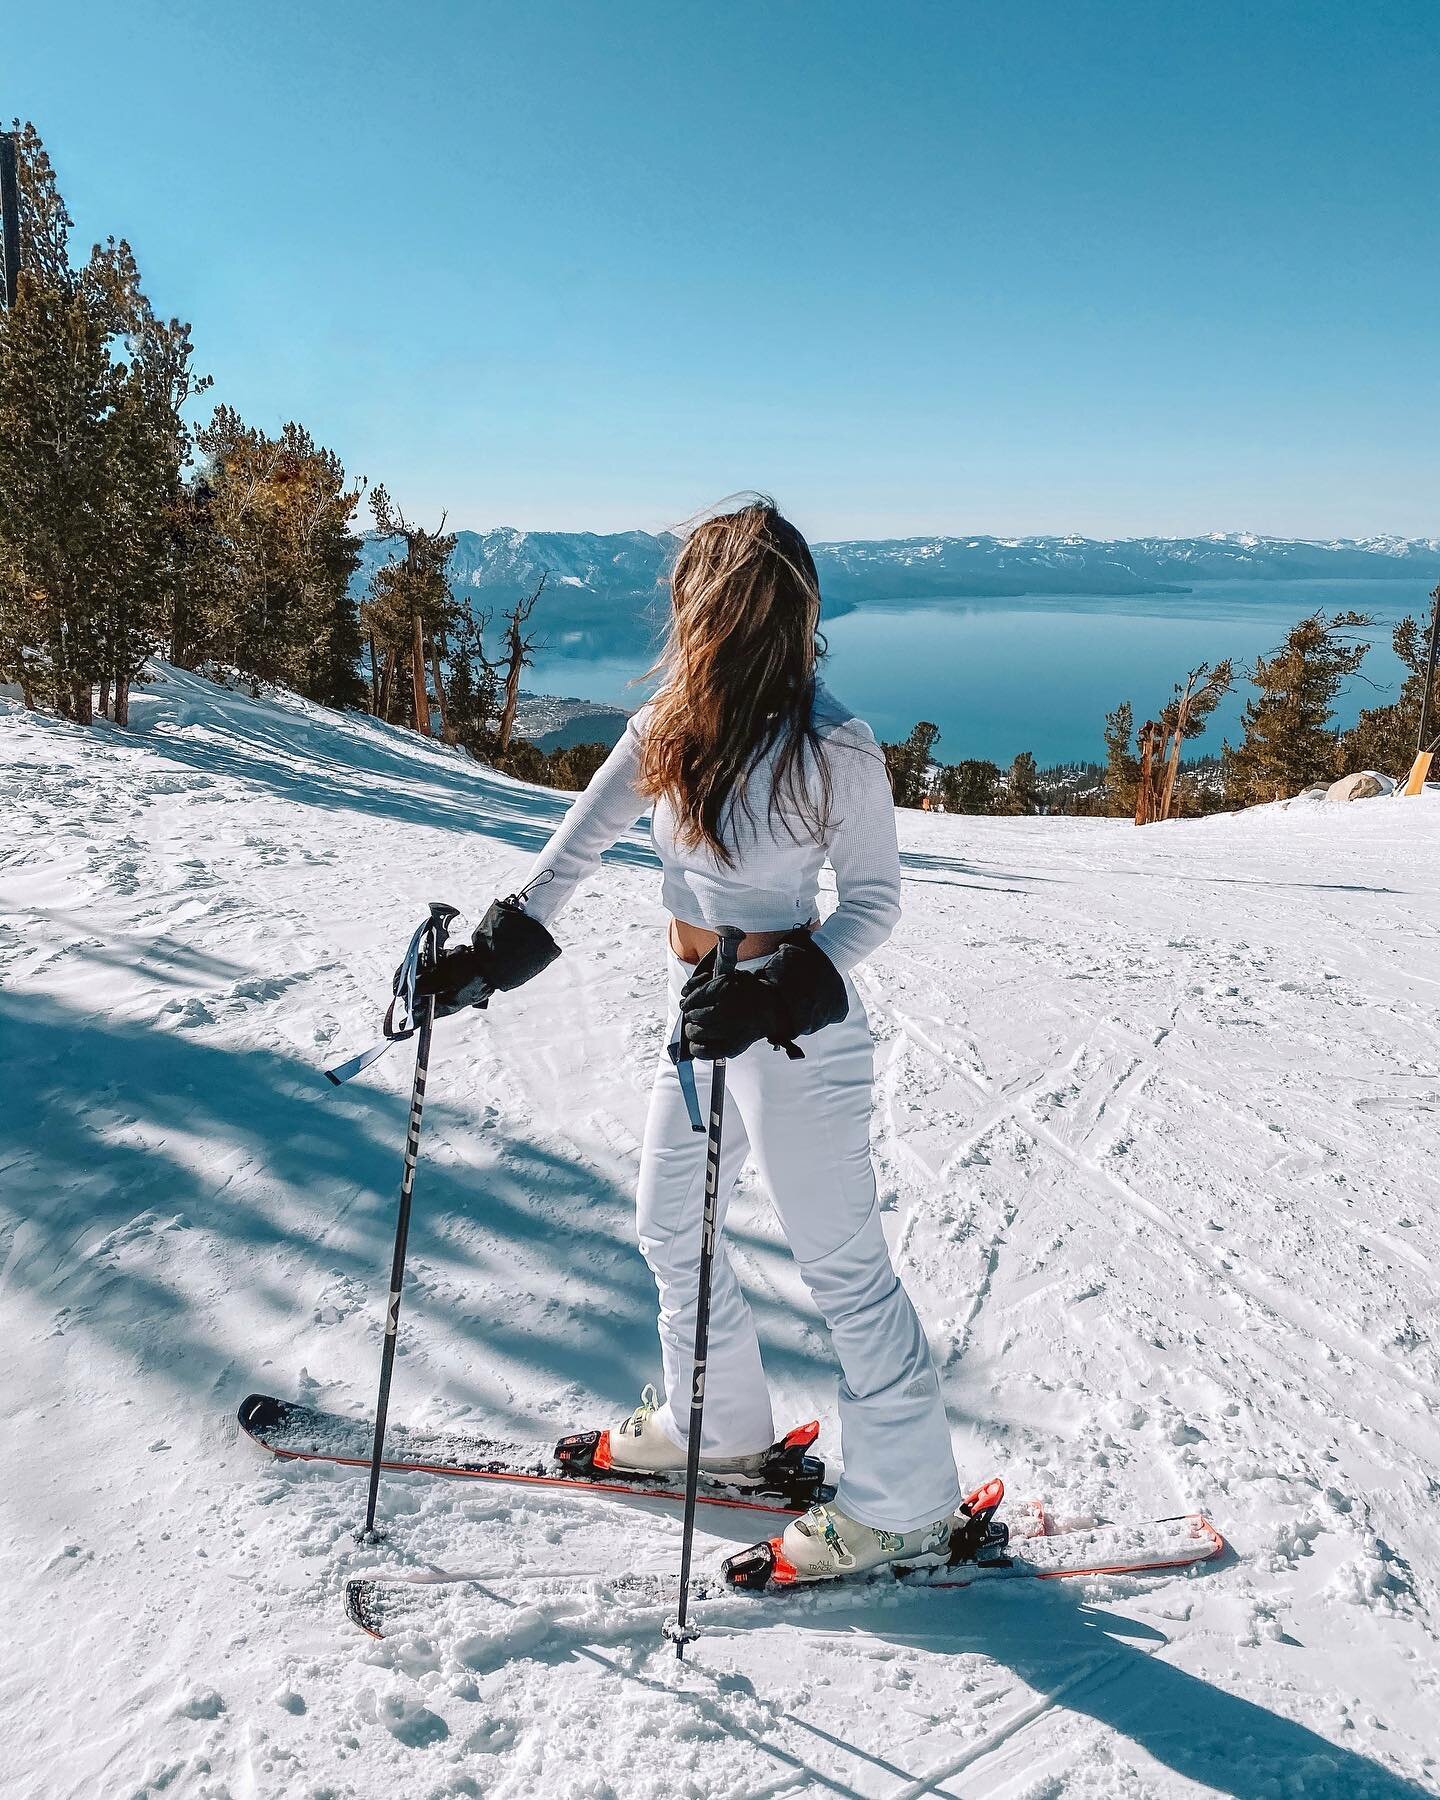 Did you hear that Tahoe is extending their season for their major ski resorts this year? I&rsquo;ve been addicted to it recently because it&rsquo;s a low risk winter activity that continues to keep me active and healthy. Here are our favorite resorts